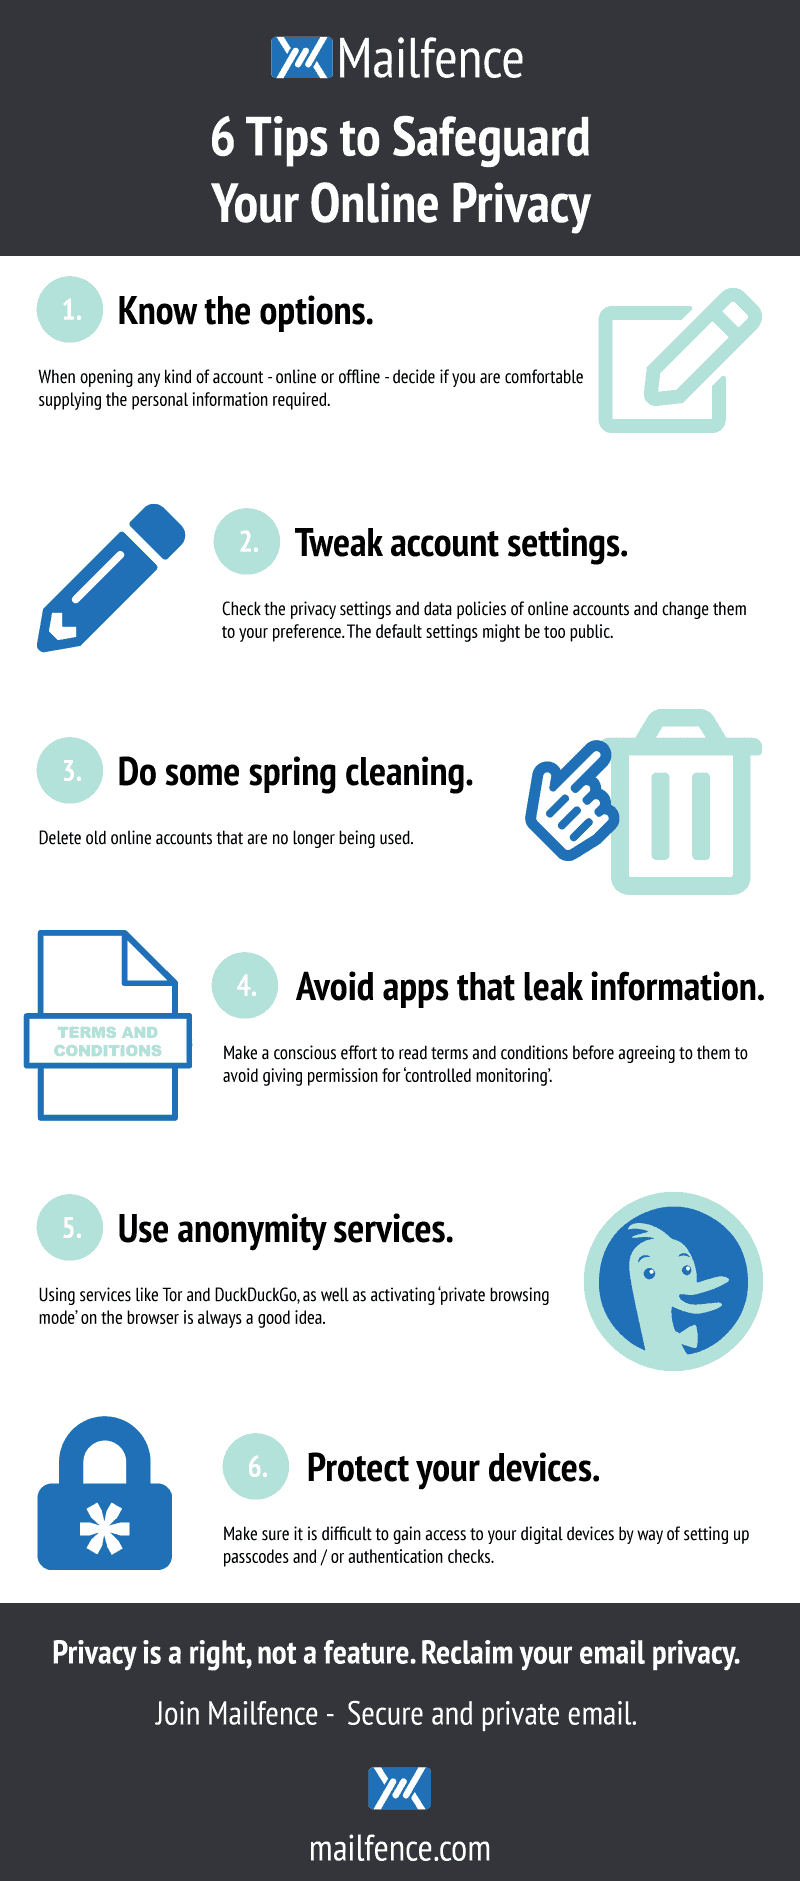 An infographic showing 6 easy tips for users to protect their online privacy.